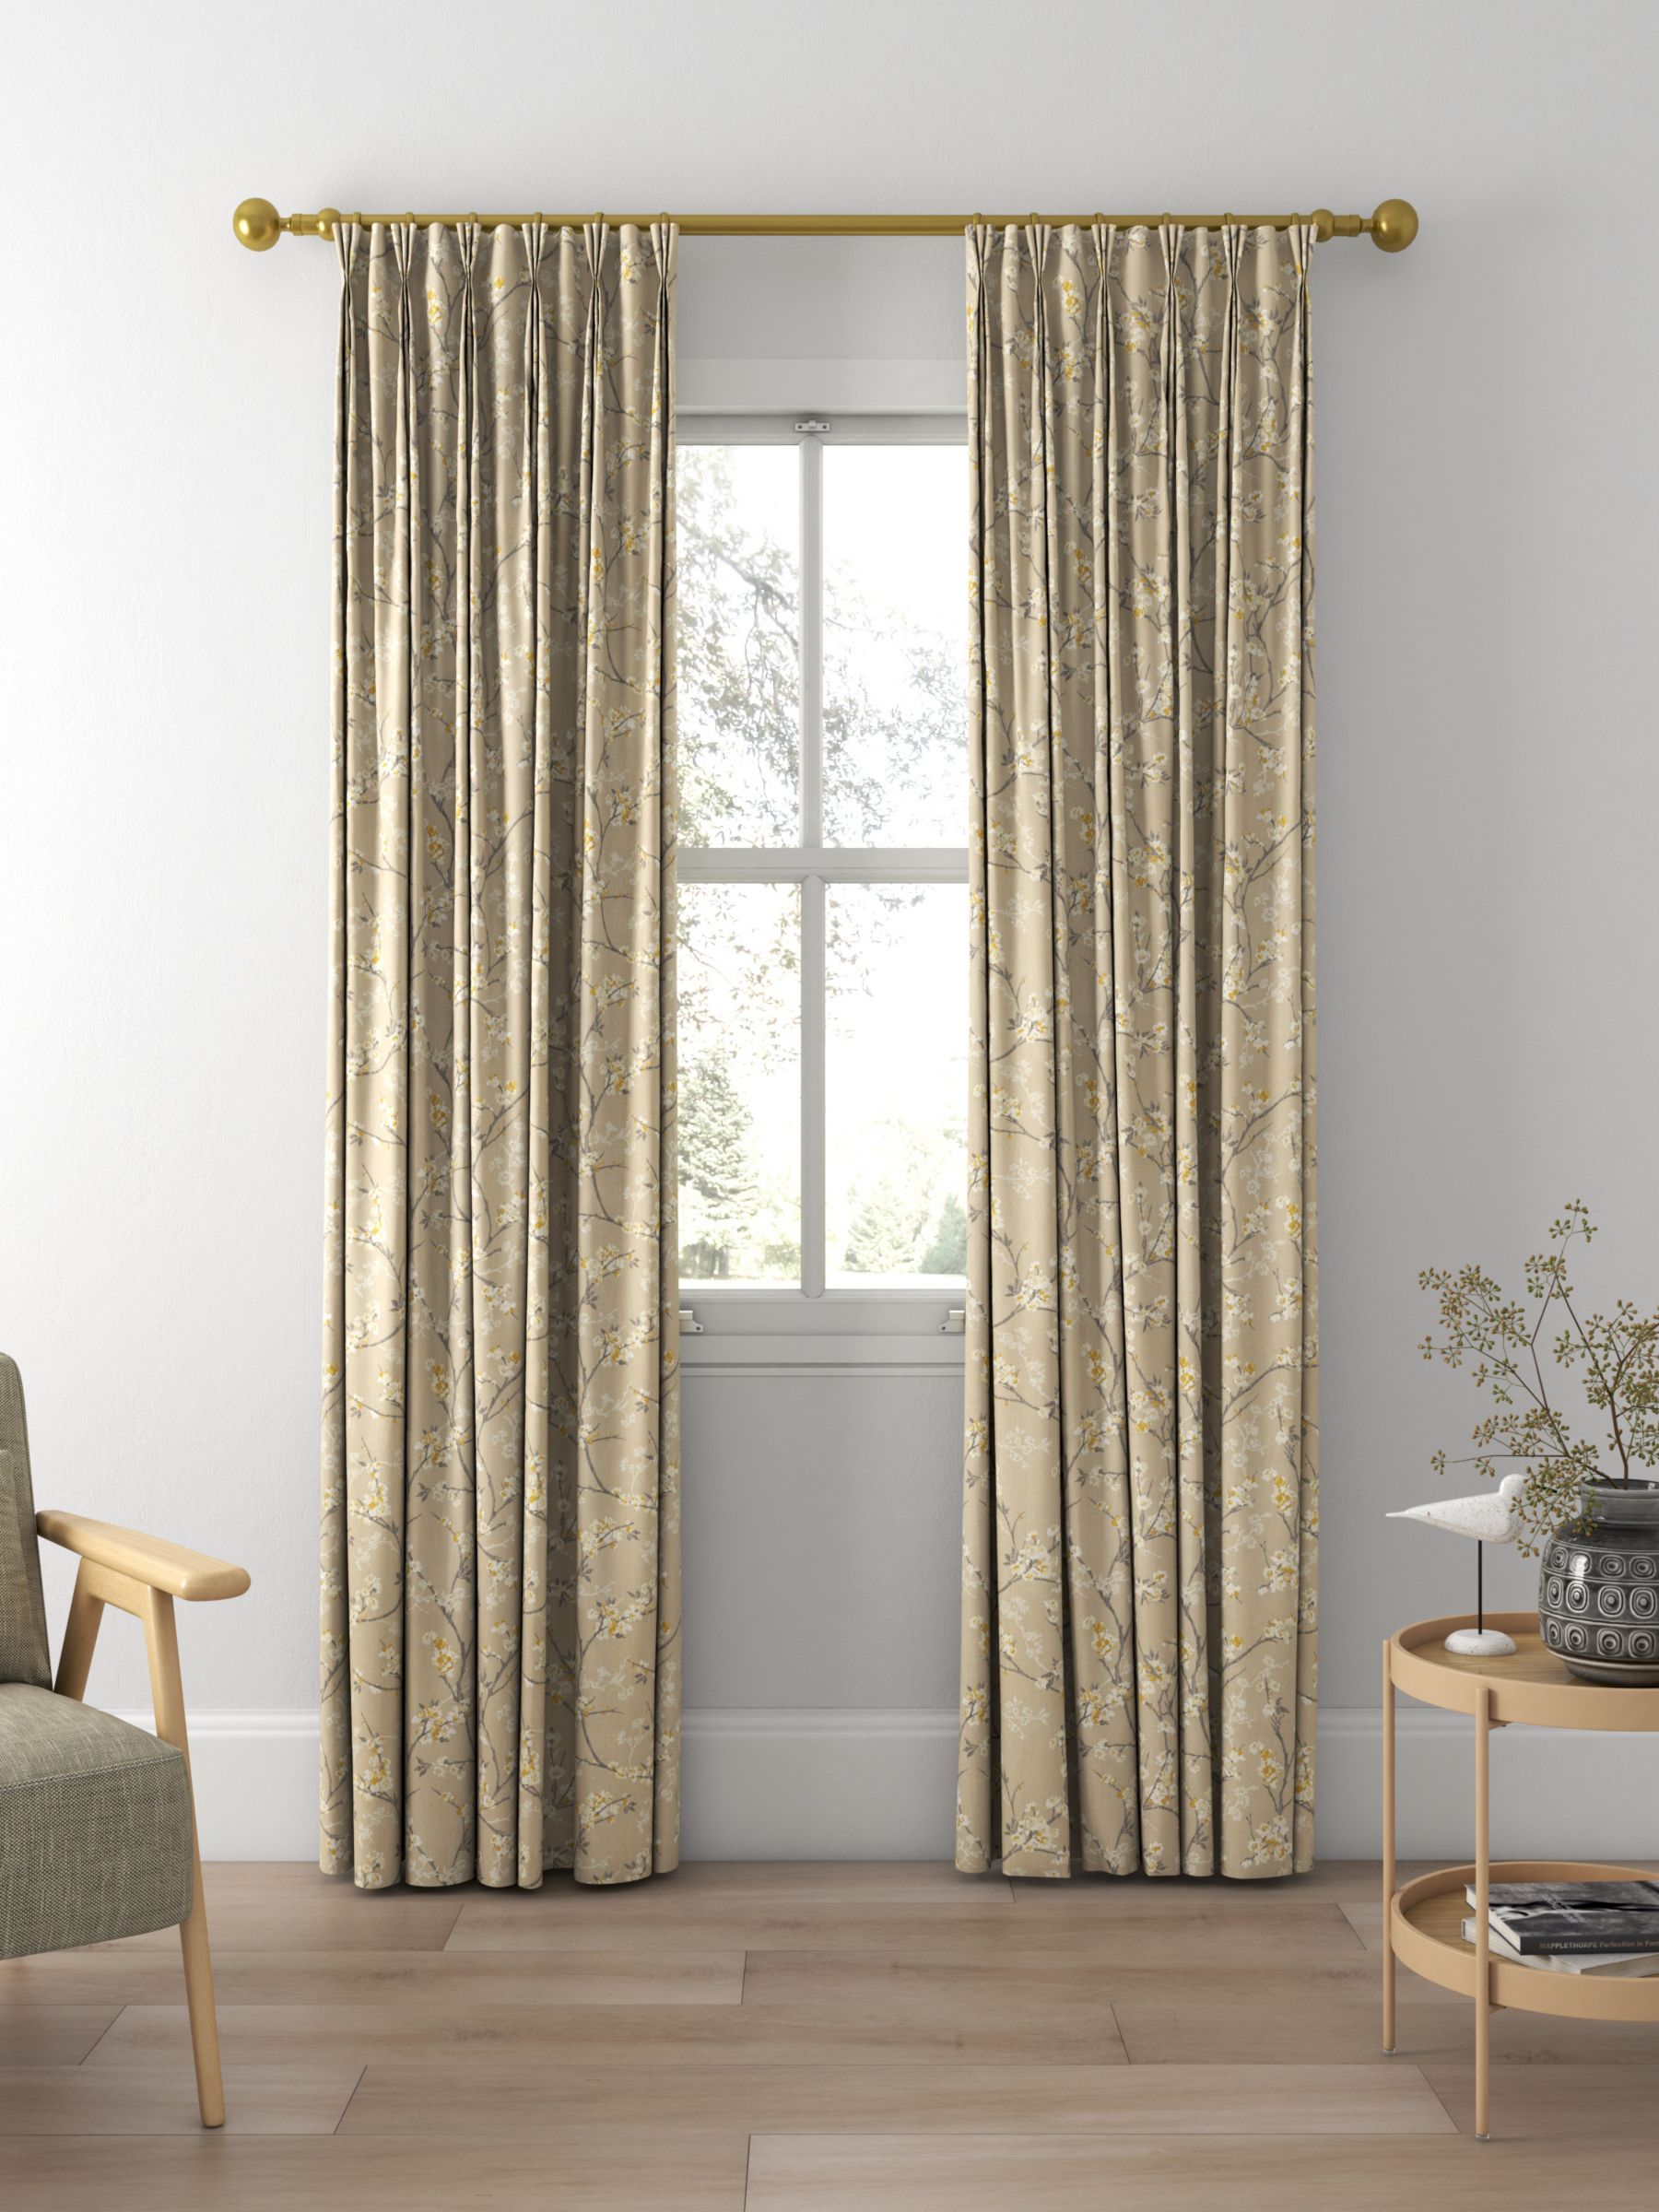 John Lewis Blossom Weave Made to Measure Curtains, Gold